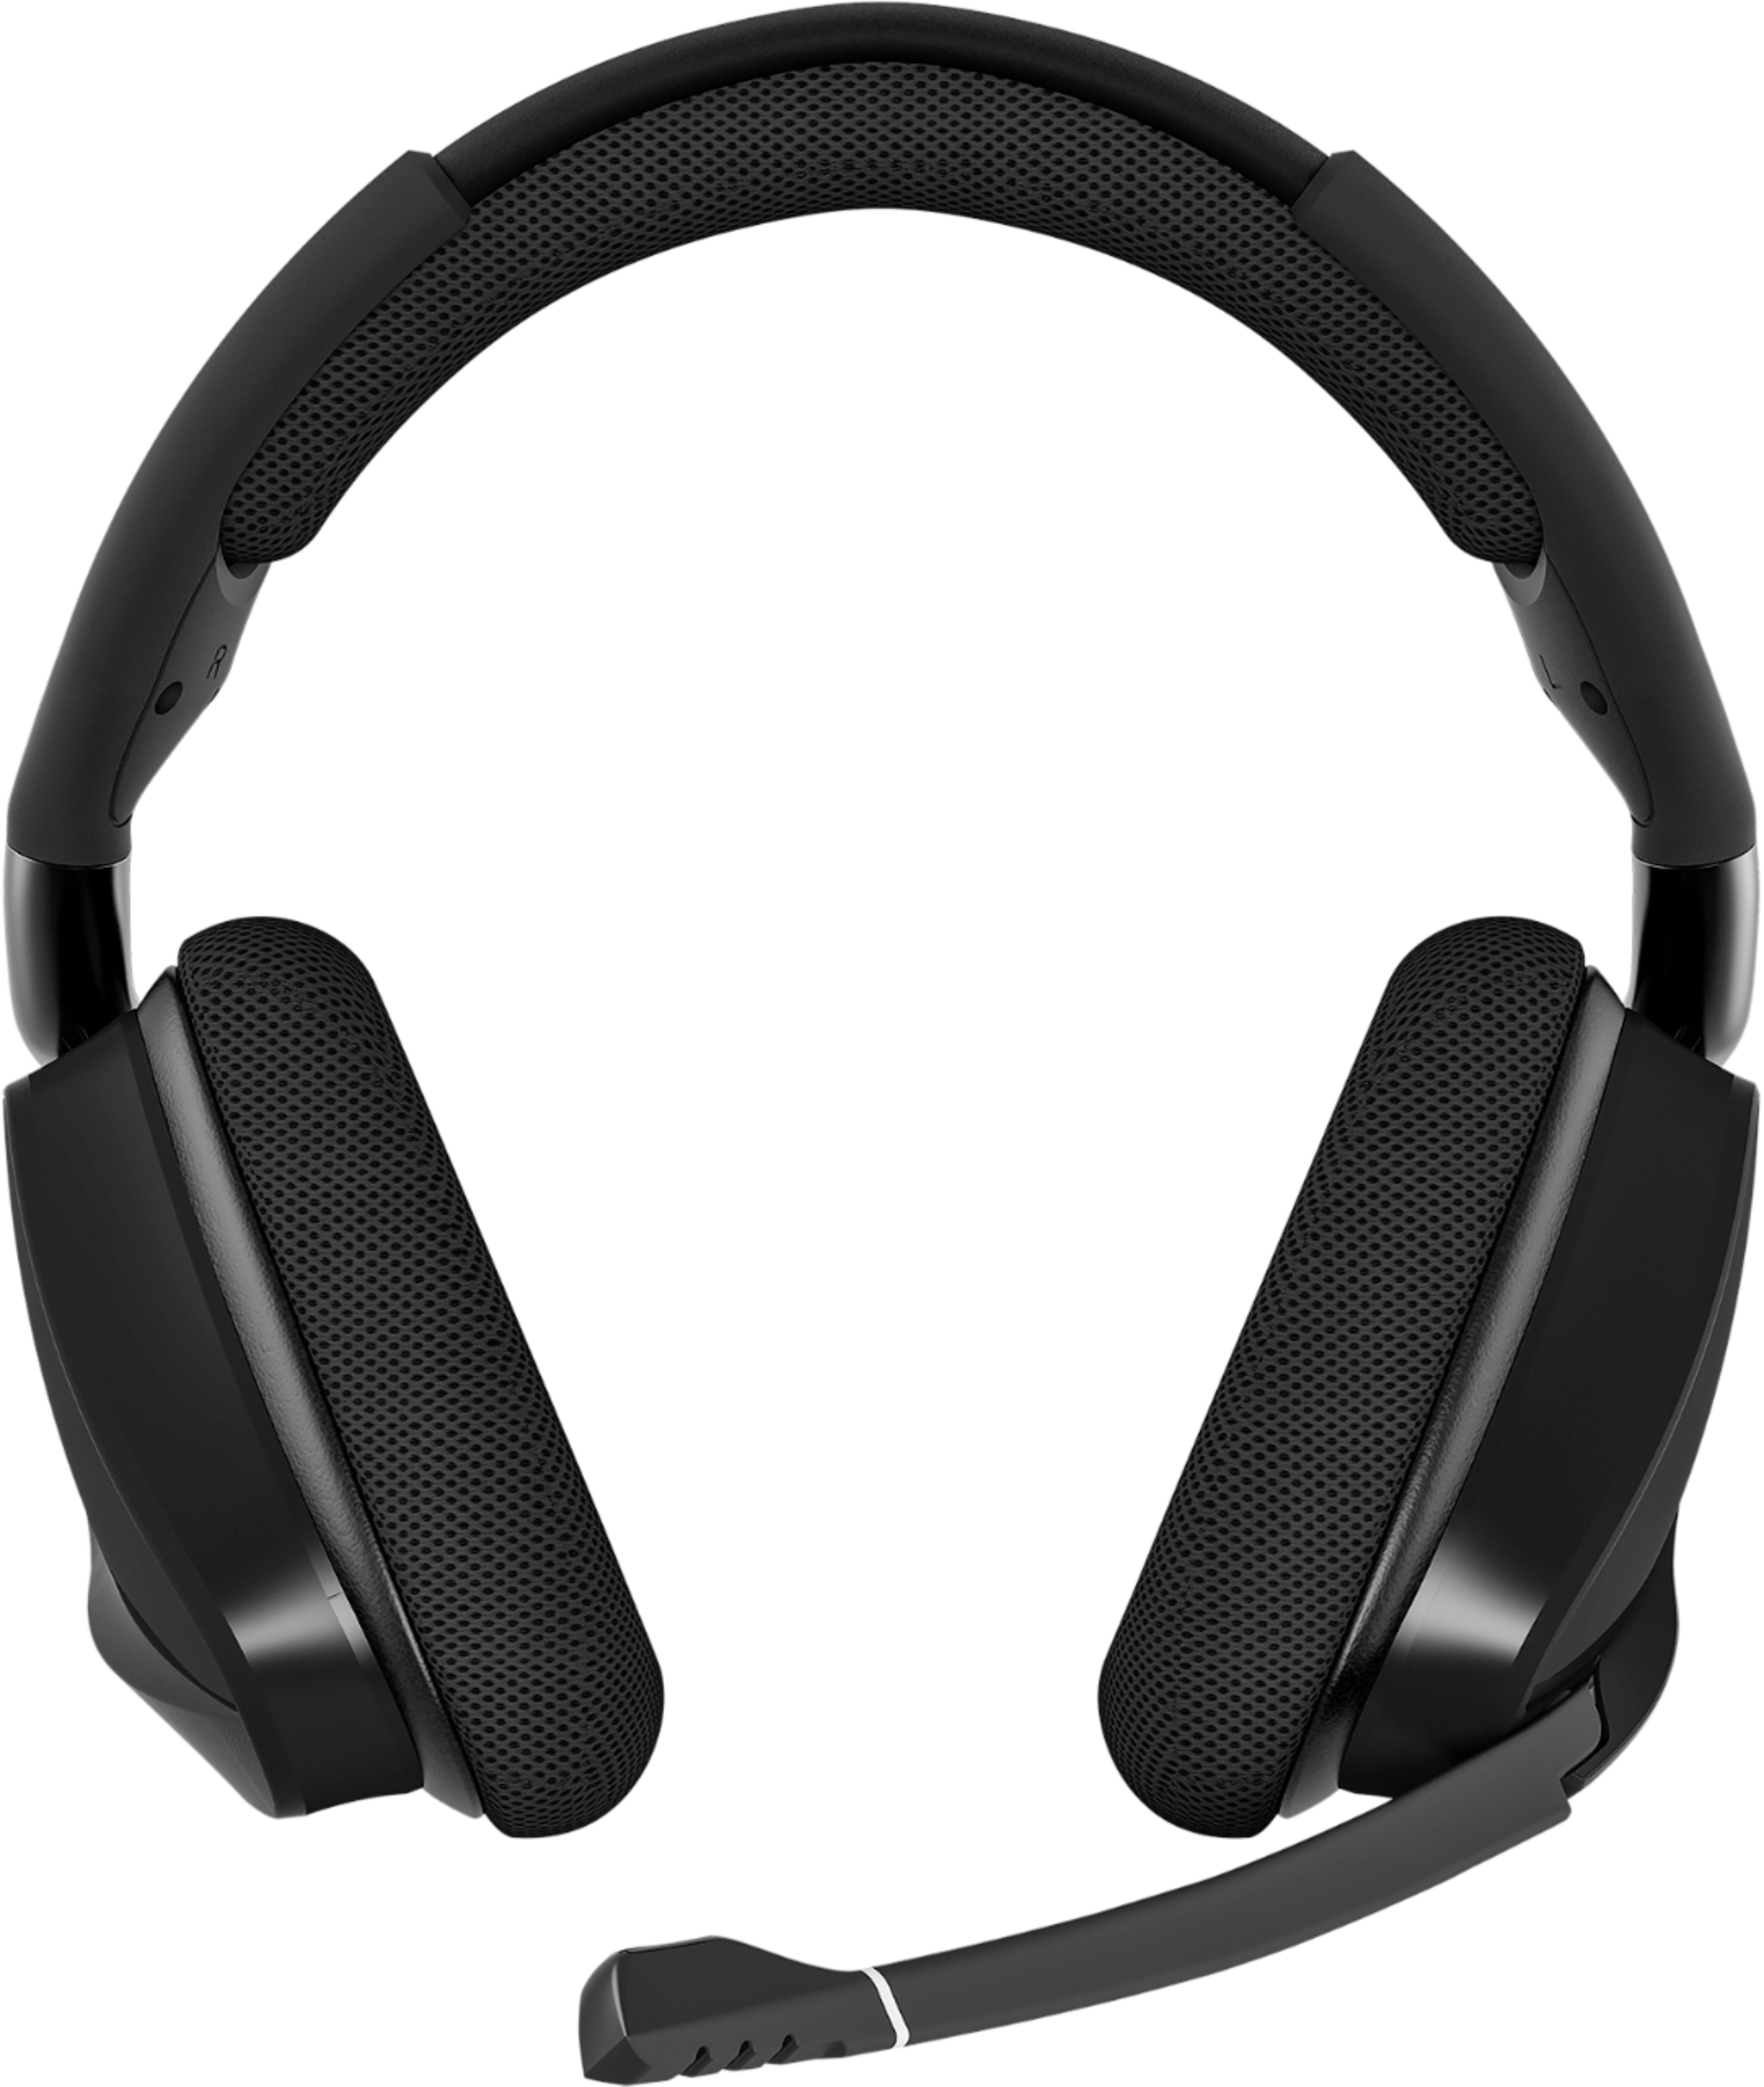 Best Buy: VOID Wireless Dolby 7.1-Channel Surround Sound Gaming Headset for PC Carbon Black CA-9011152-NA